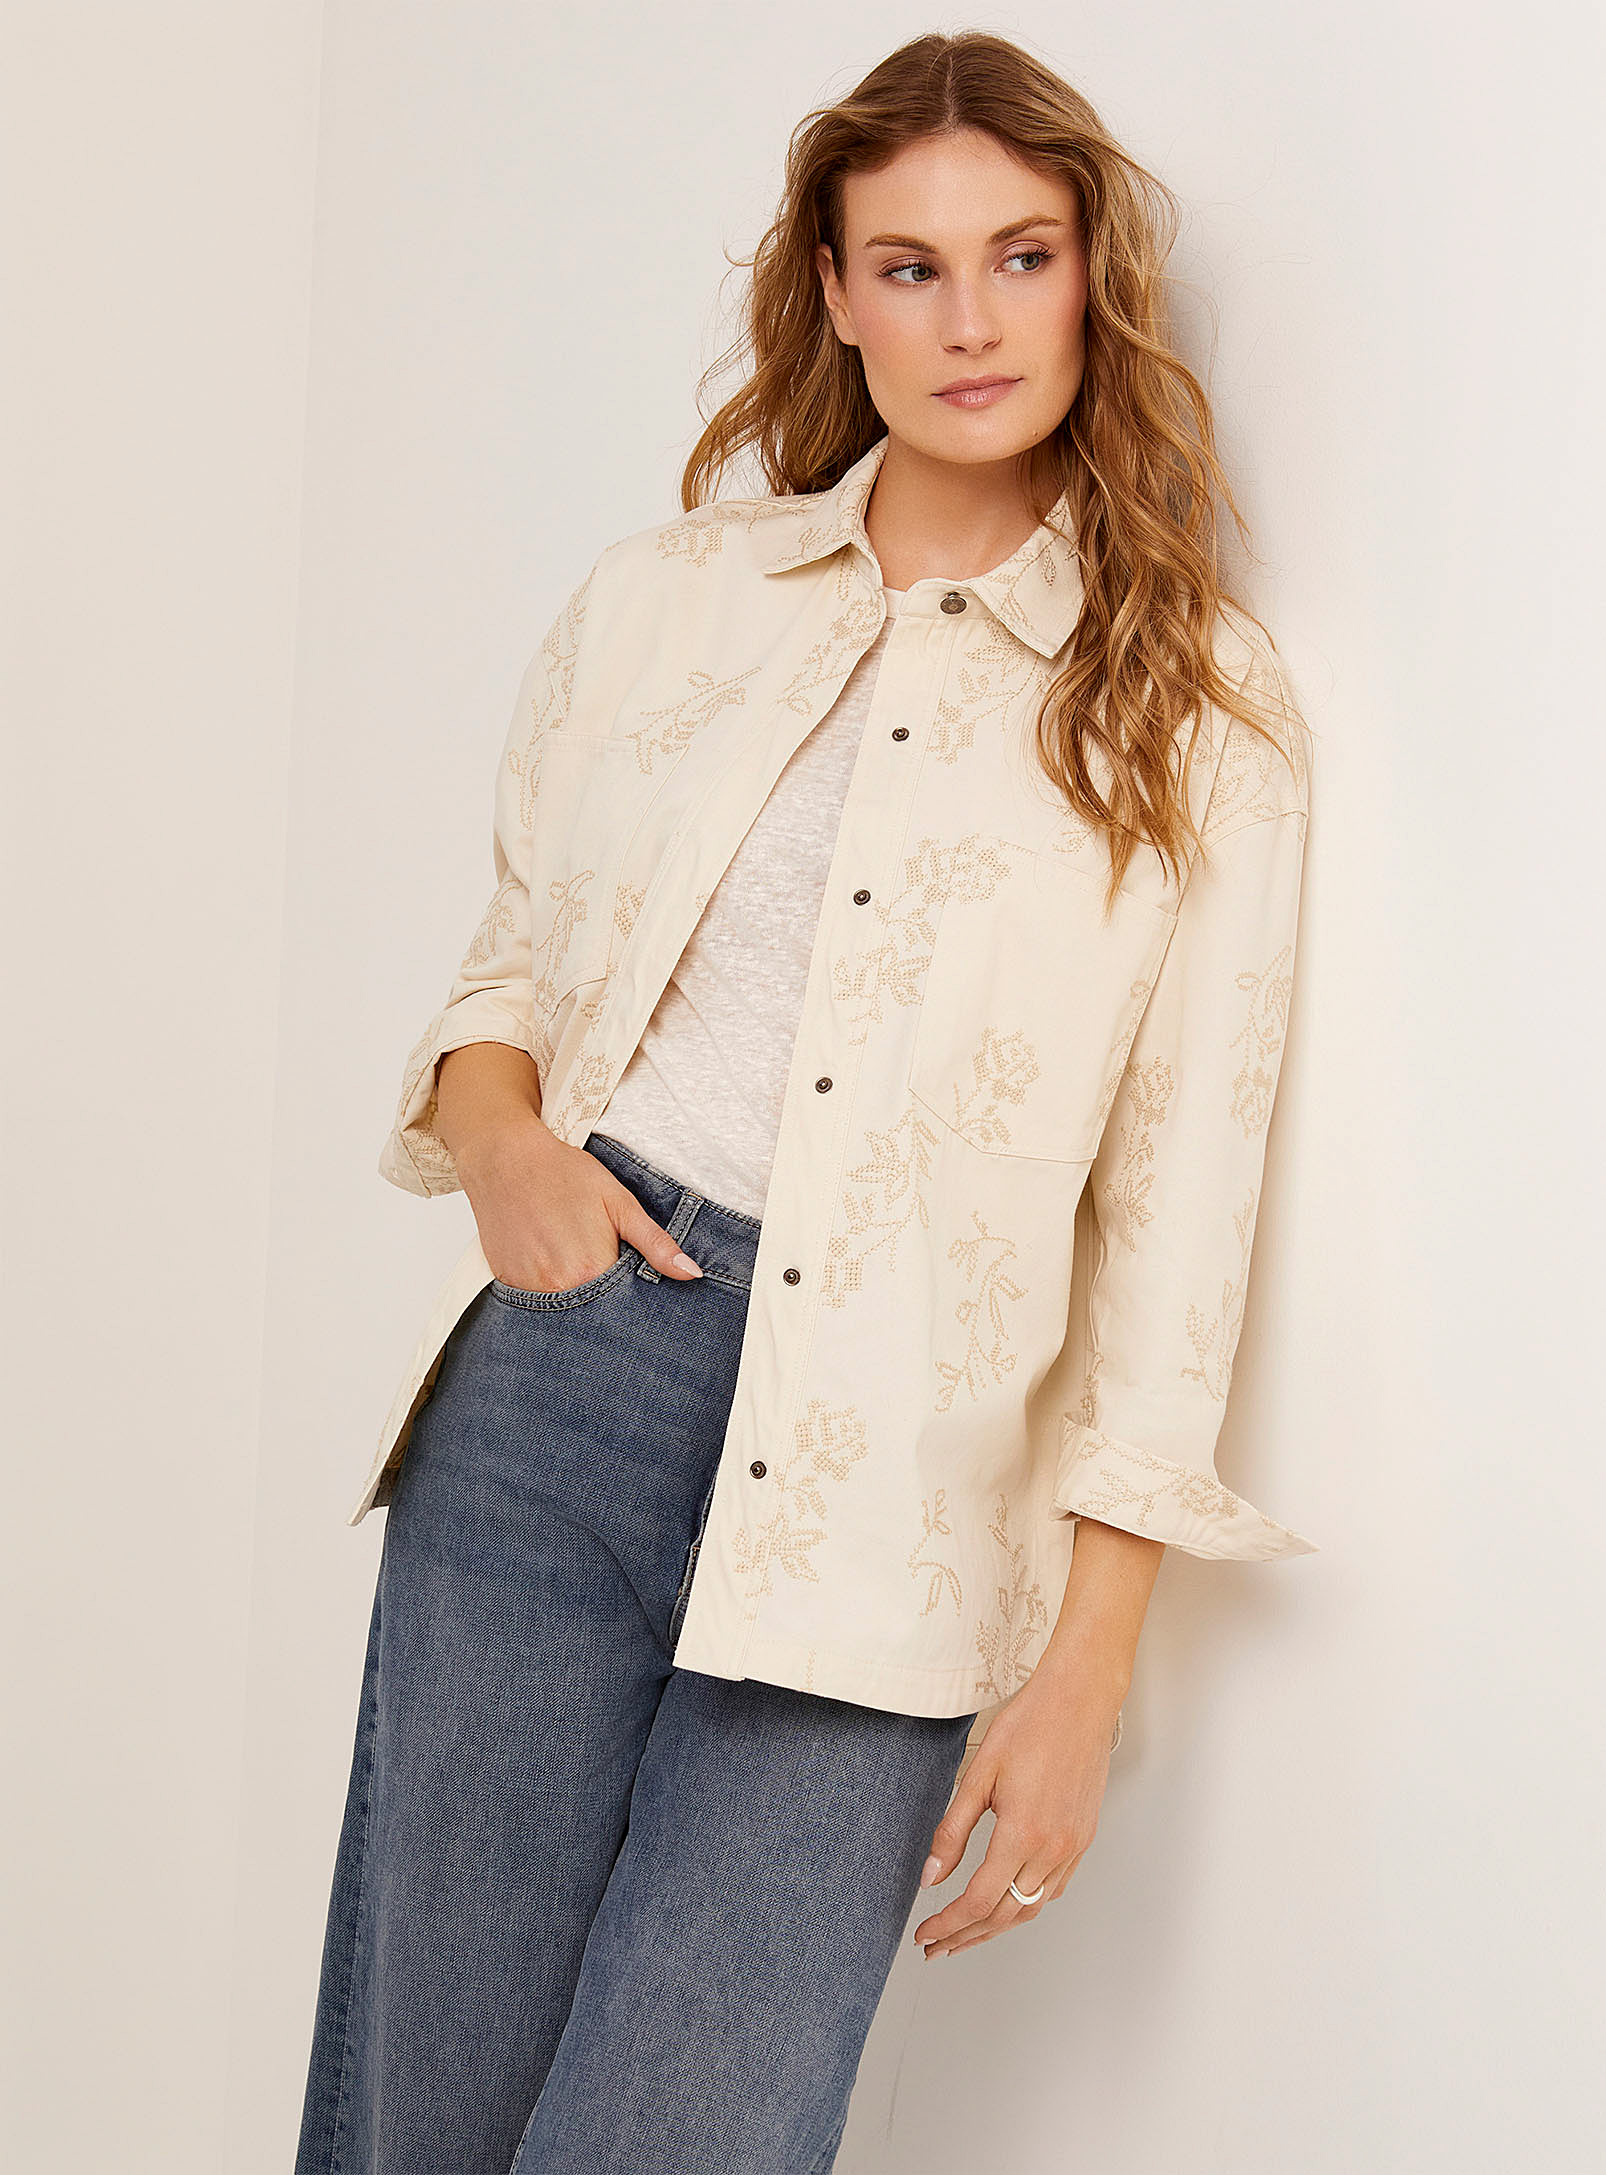 Contemporaine - Women's Tone-on tone embroidery overshirt